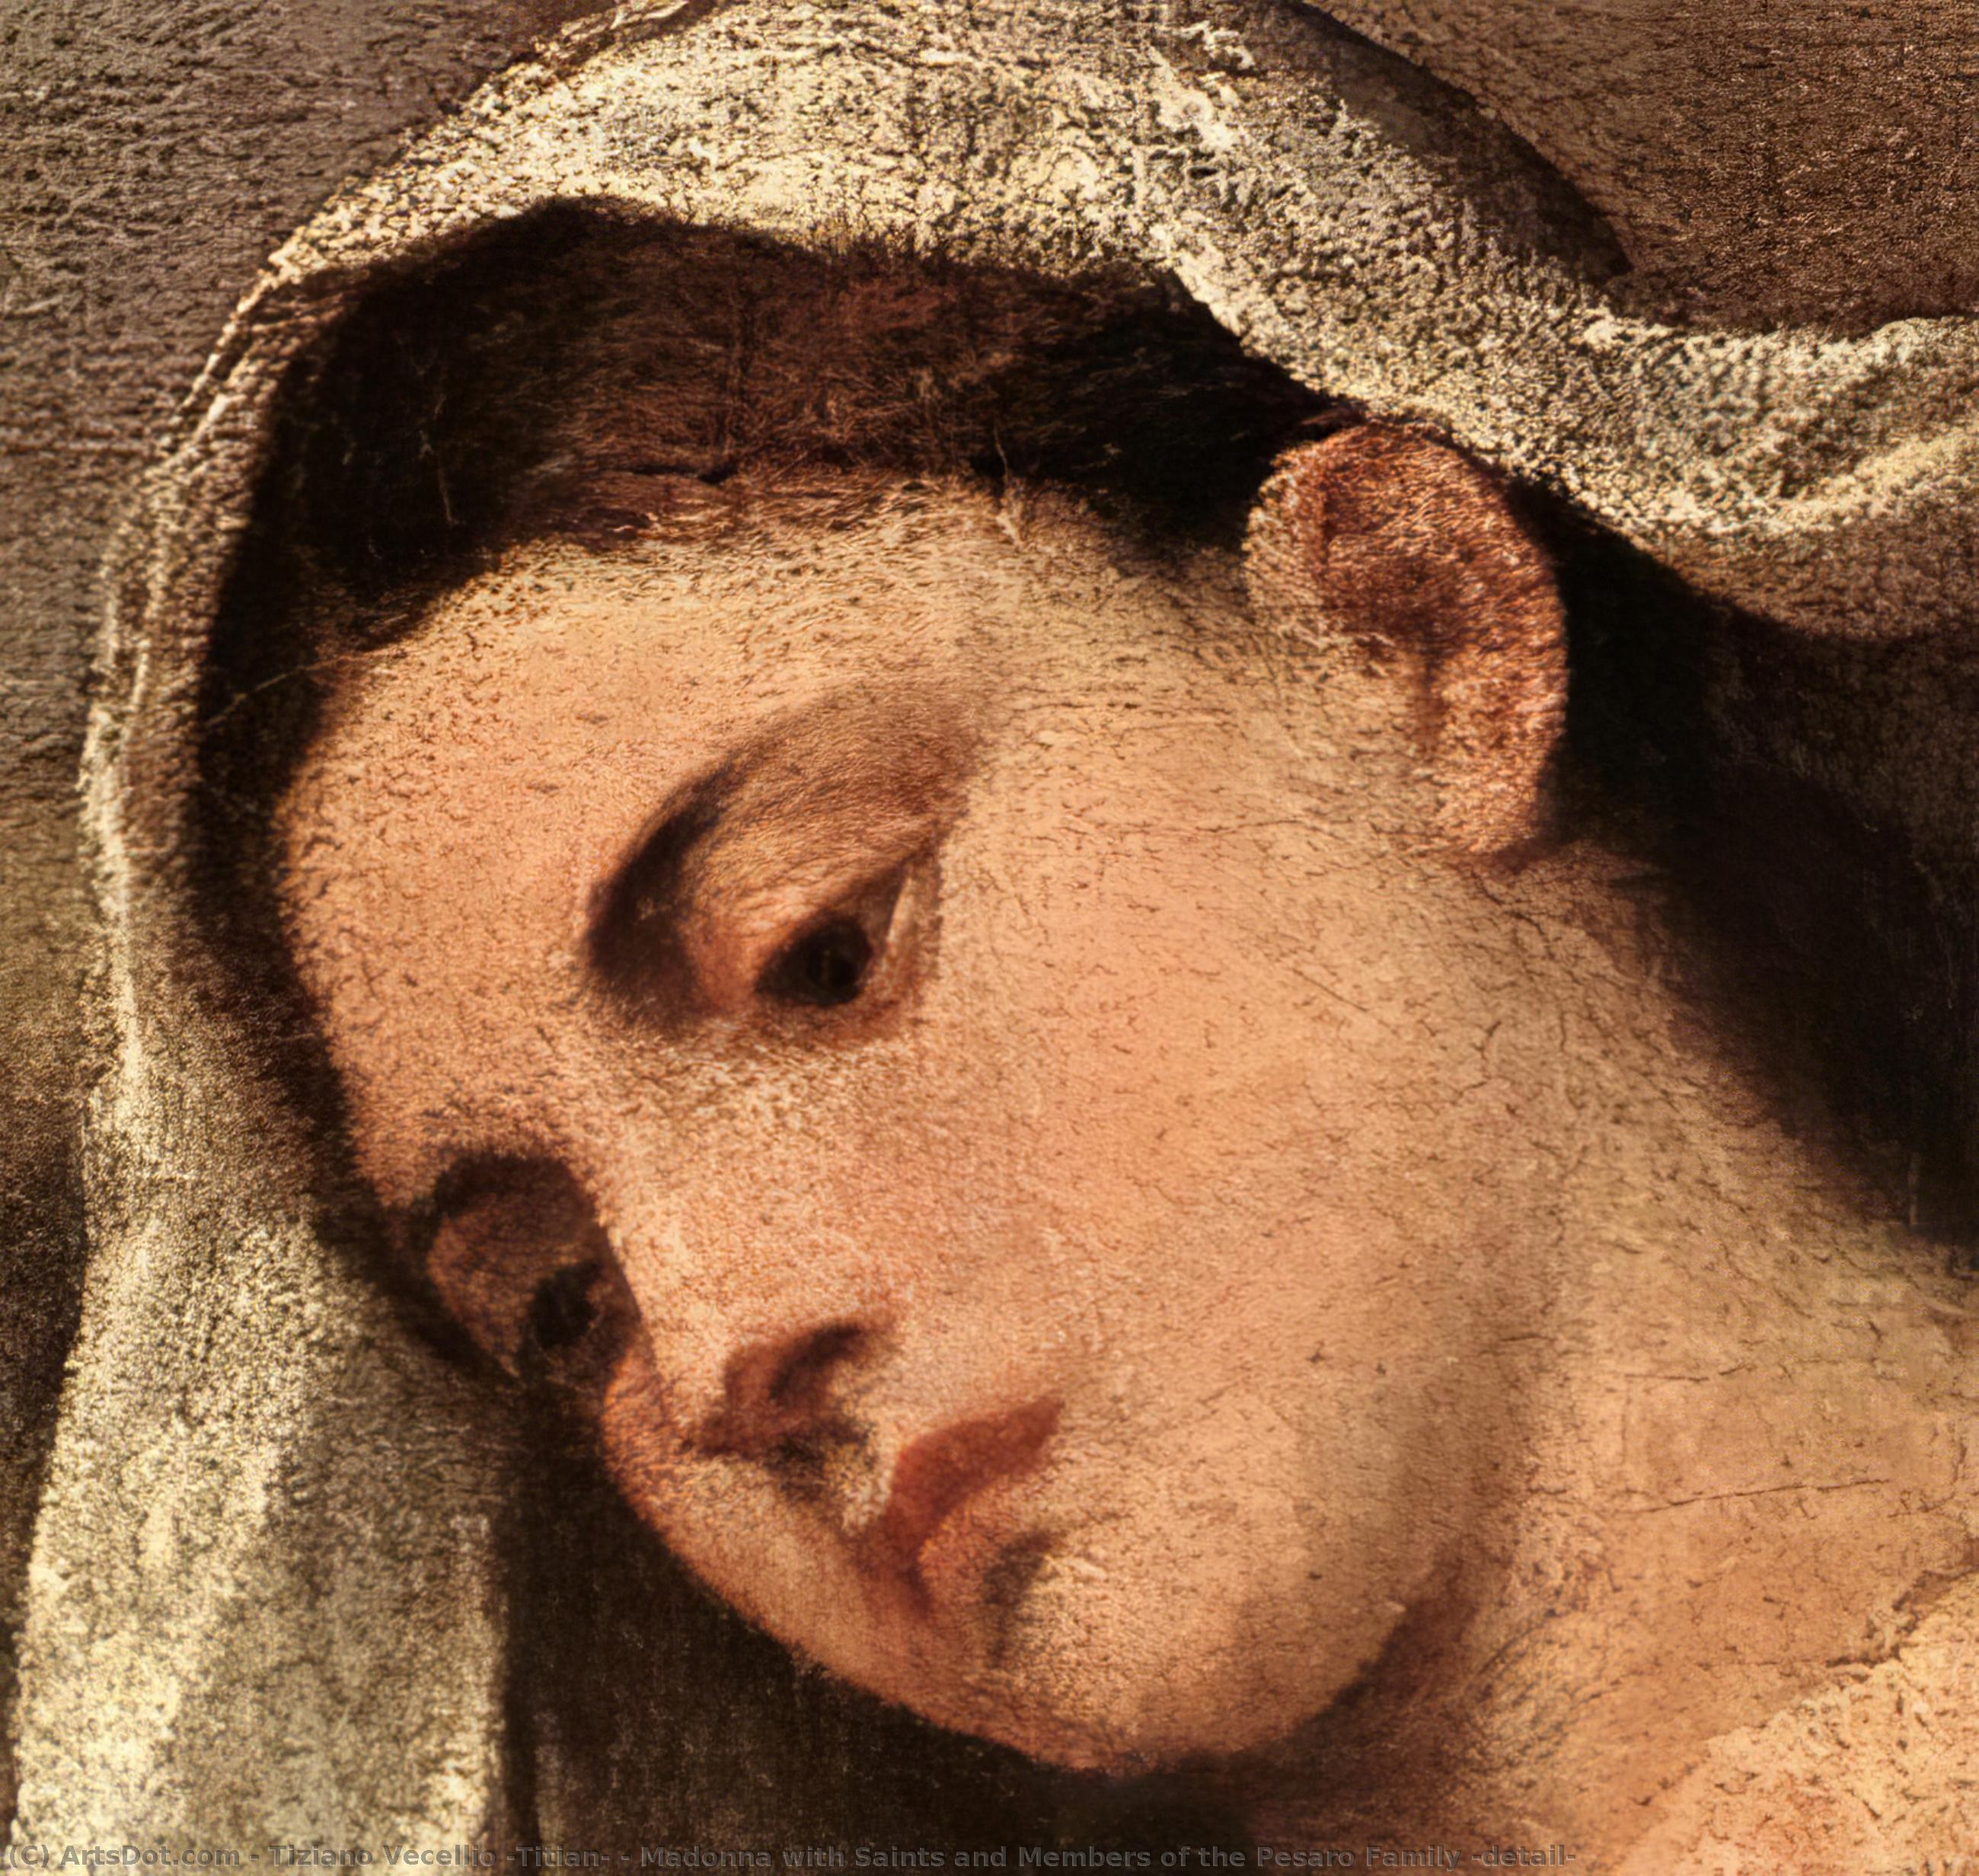 WikiOO.org - Encyclopedia of Fine Arts - Maleri, Artwork Tiziano Vecellio (Titian) - Madonna with Saints and Members of the Pesaro Family (detail)